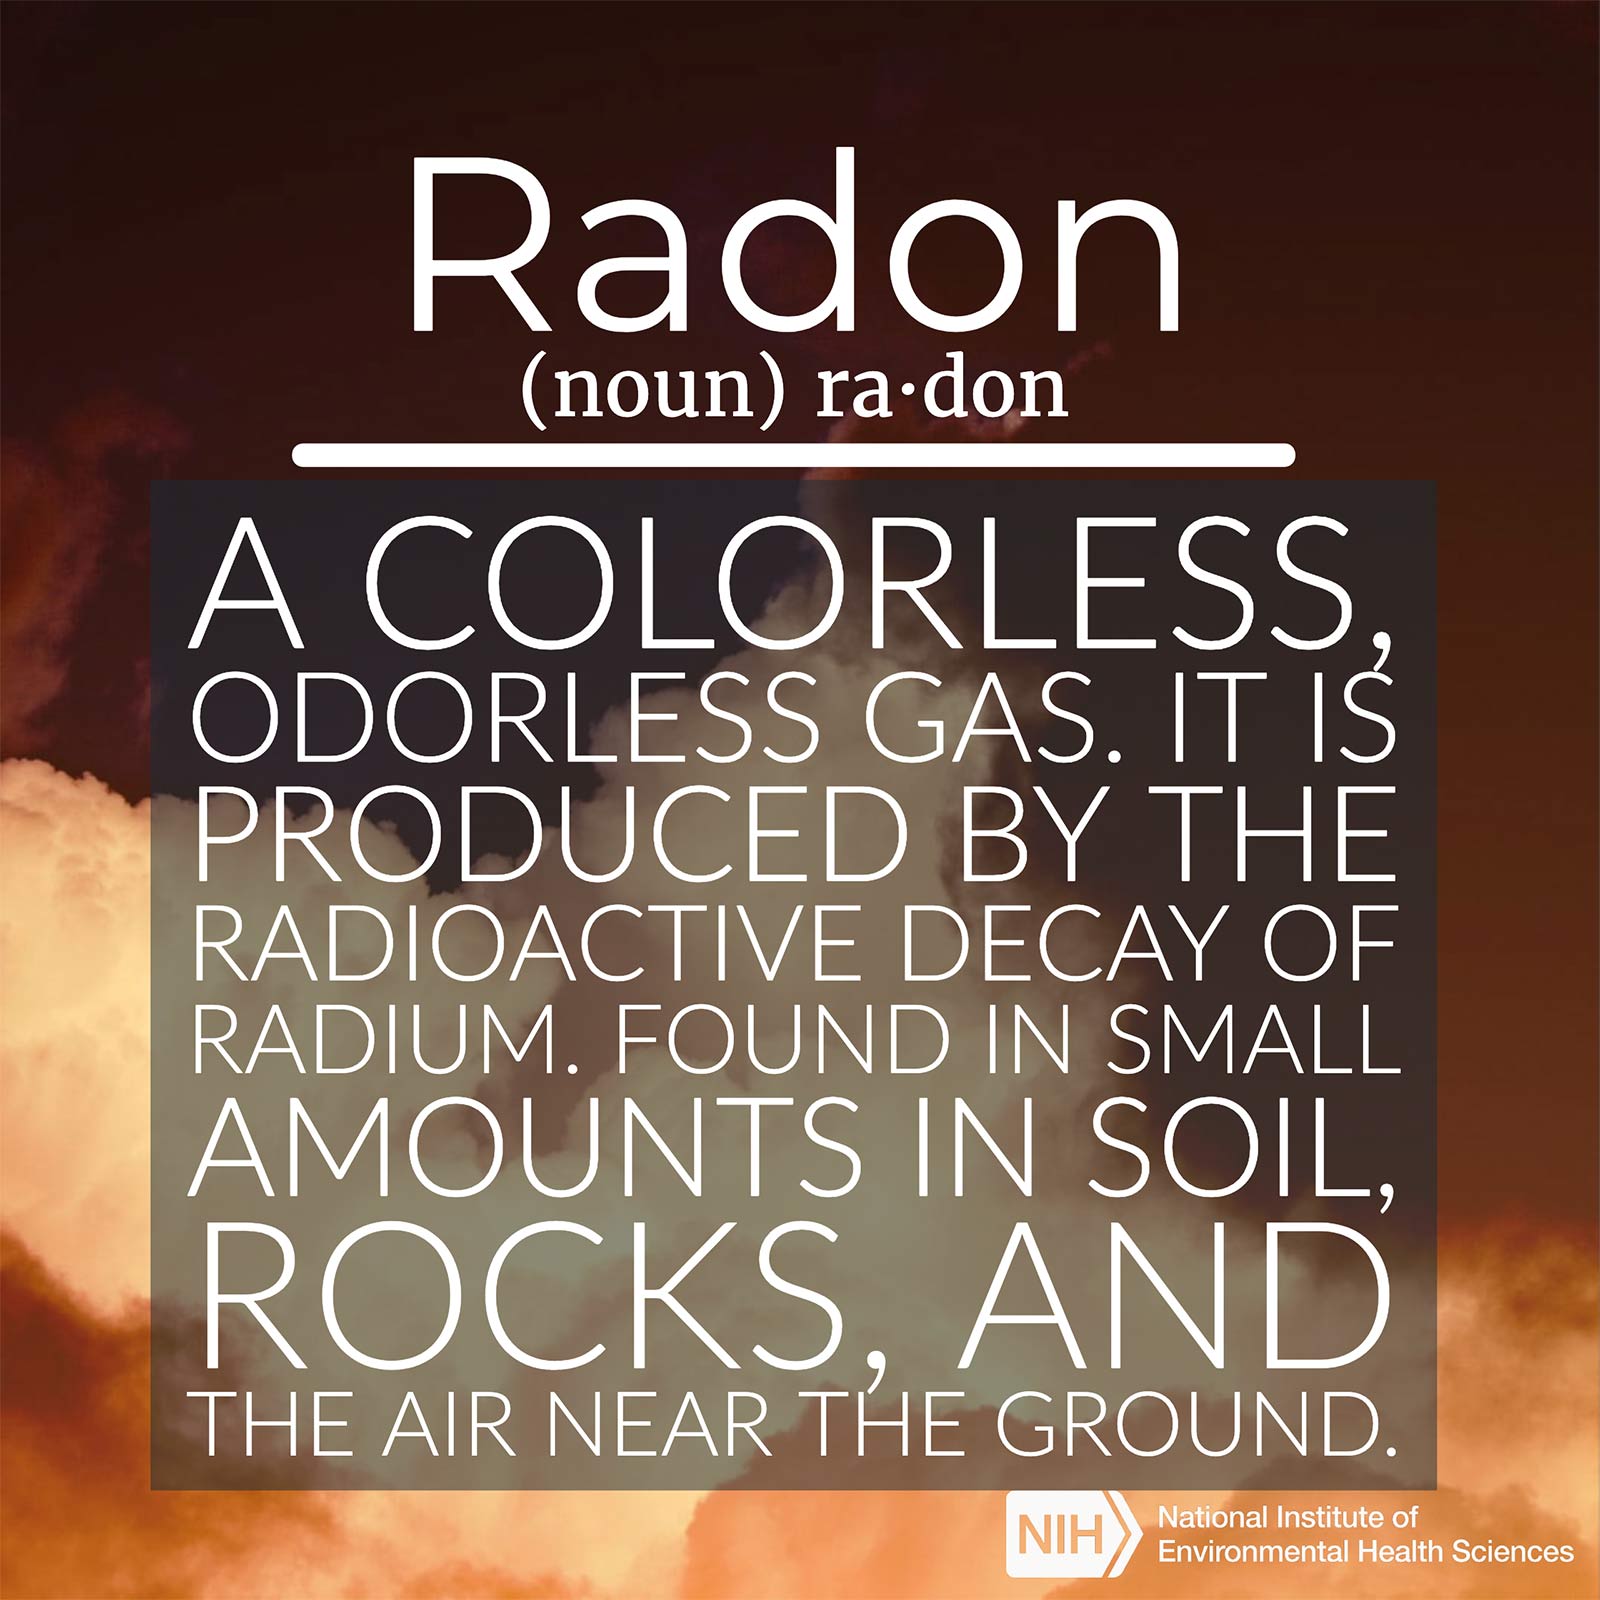 Radon (noun) defined as &#39;a colorless, odorless gas. It is produced by the radioactive decay of radium. Found in small amounts in soil, rocks, and the air near the ground.&#39;